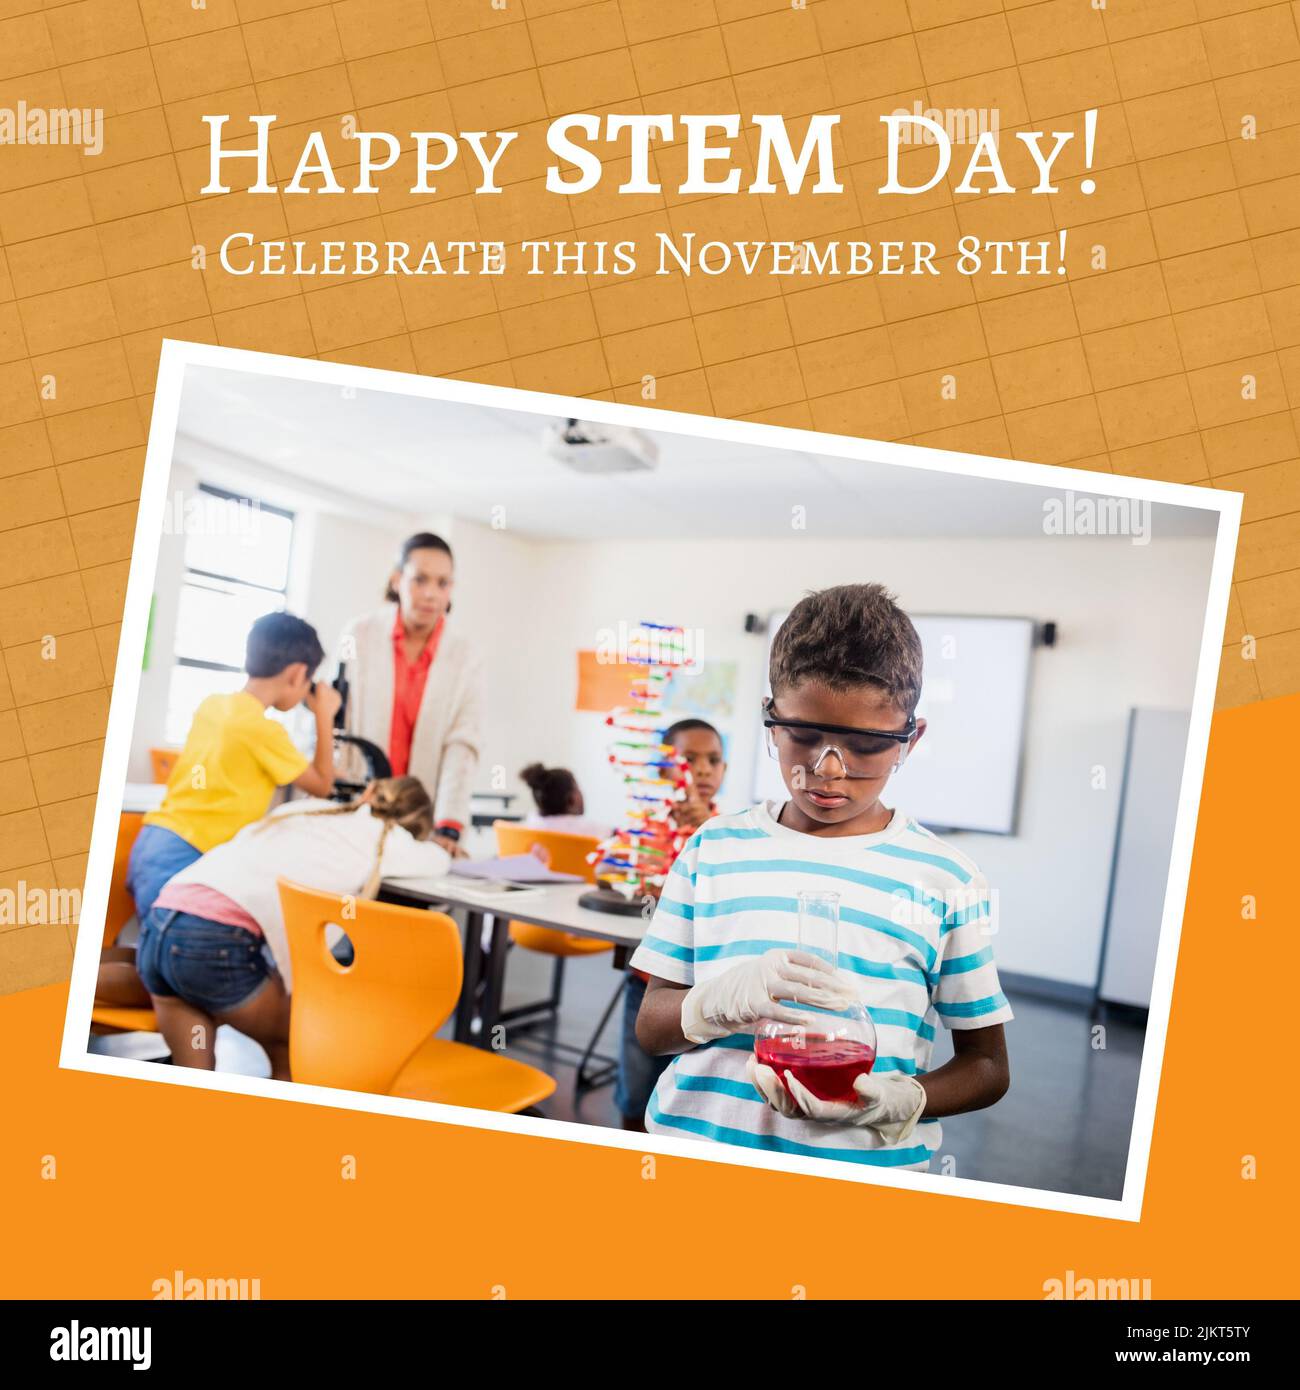 Composition of happy stem day text and photo of biracial boy holding laboratory beaker at school Stock Photo